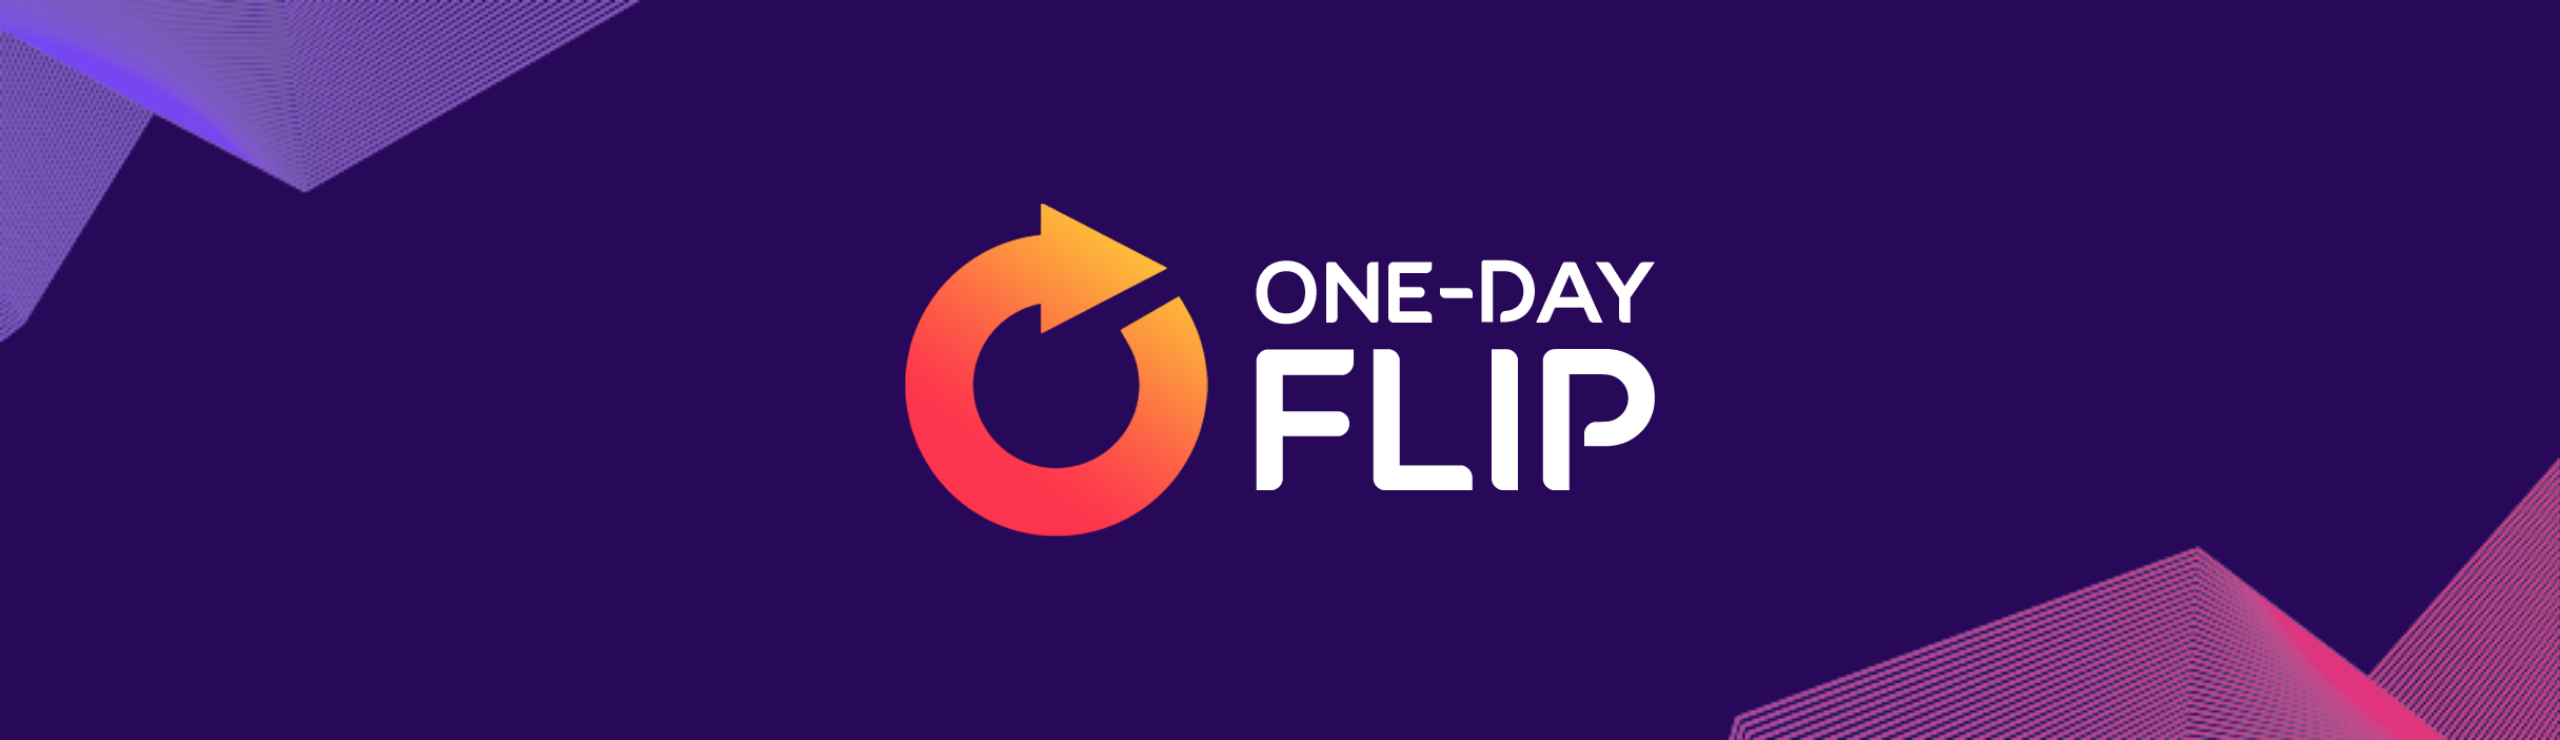 One-Day Flip by Cam Dunlap